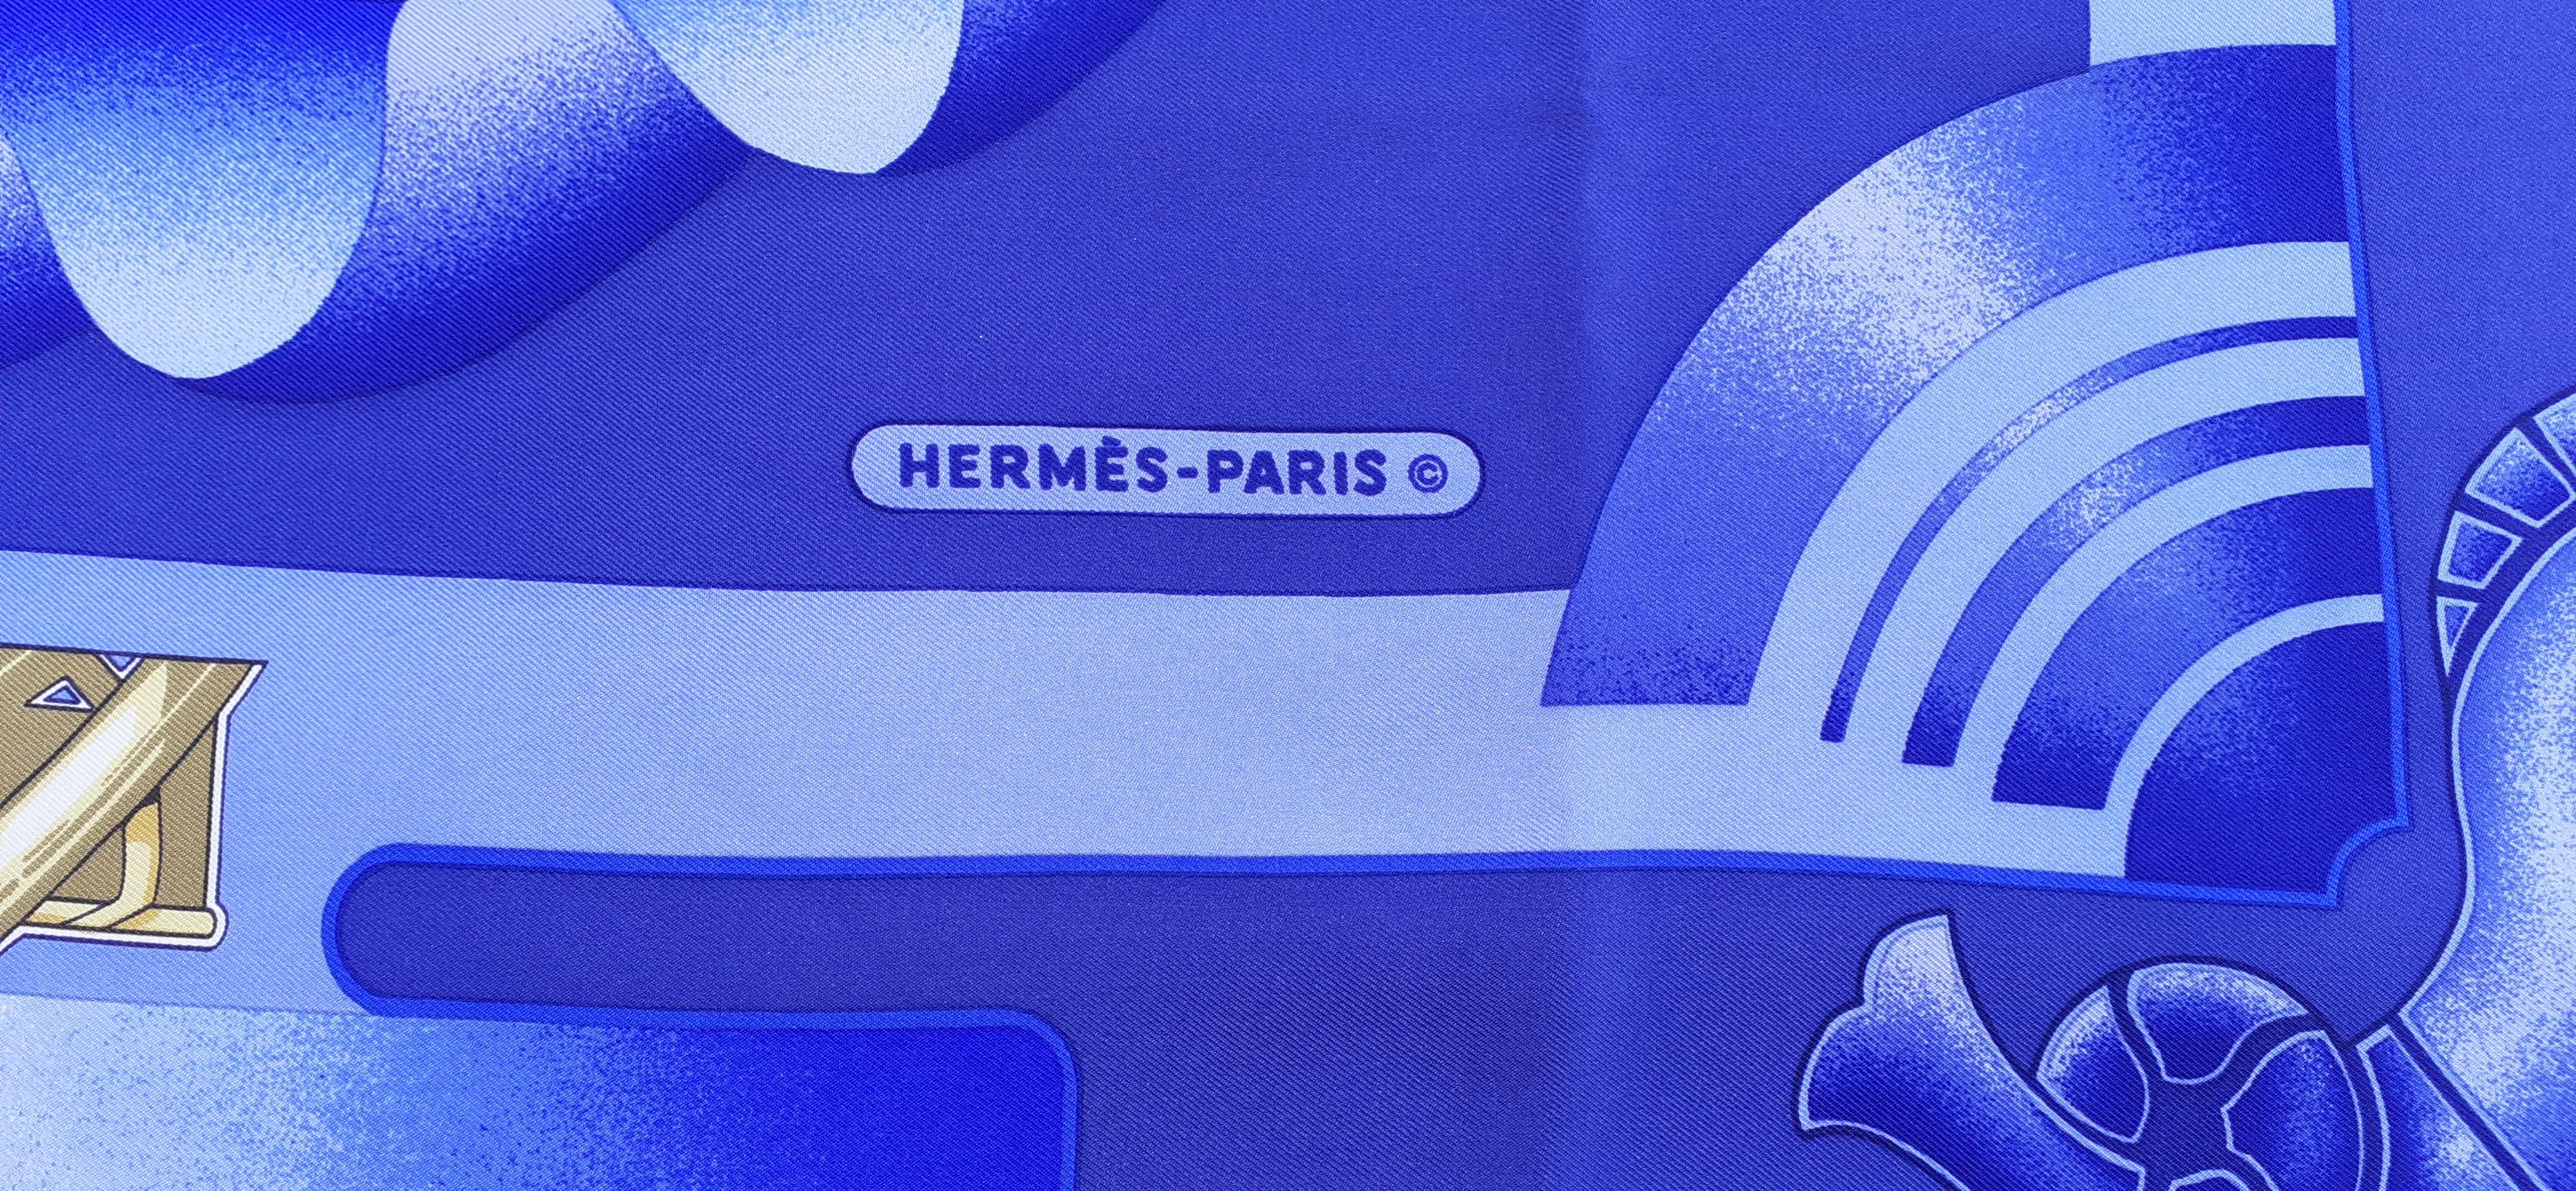 Hermès Silk Scarf Sold Exclusively Aboard Air France Planes Ledoux 1962 Rare For Sale 2